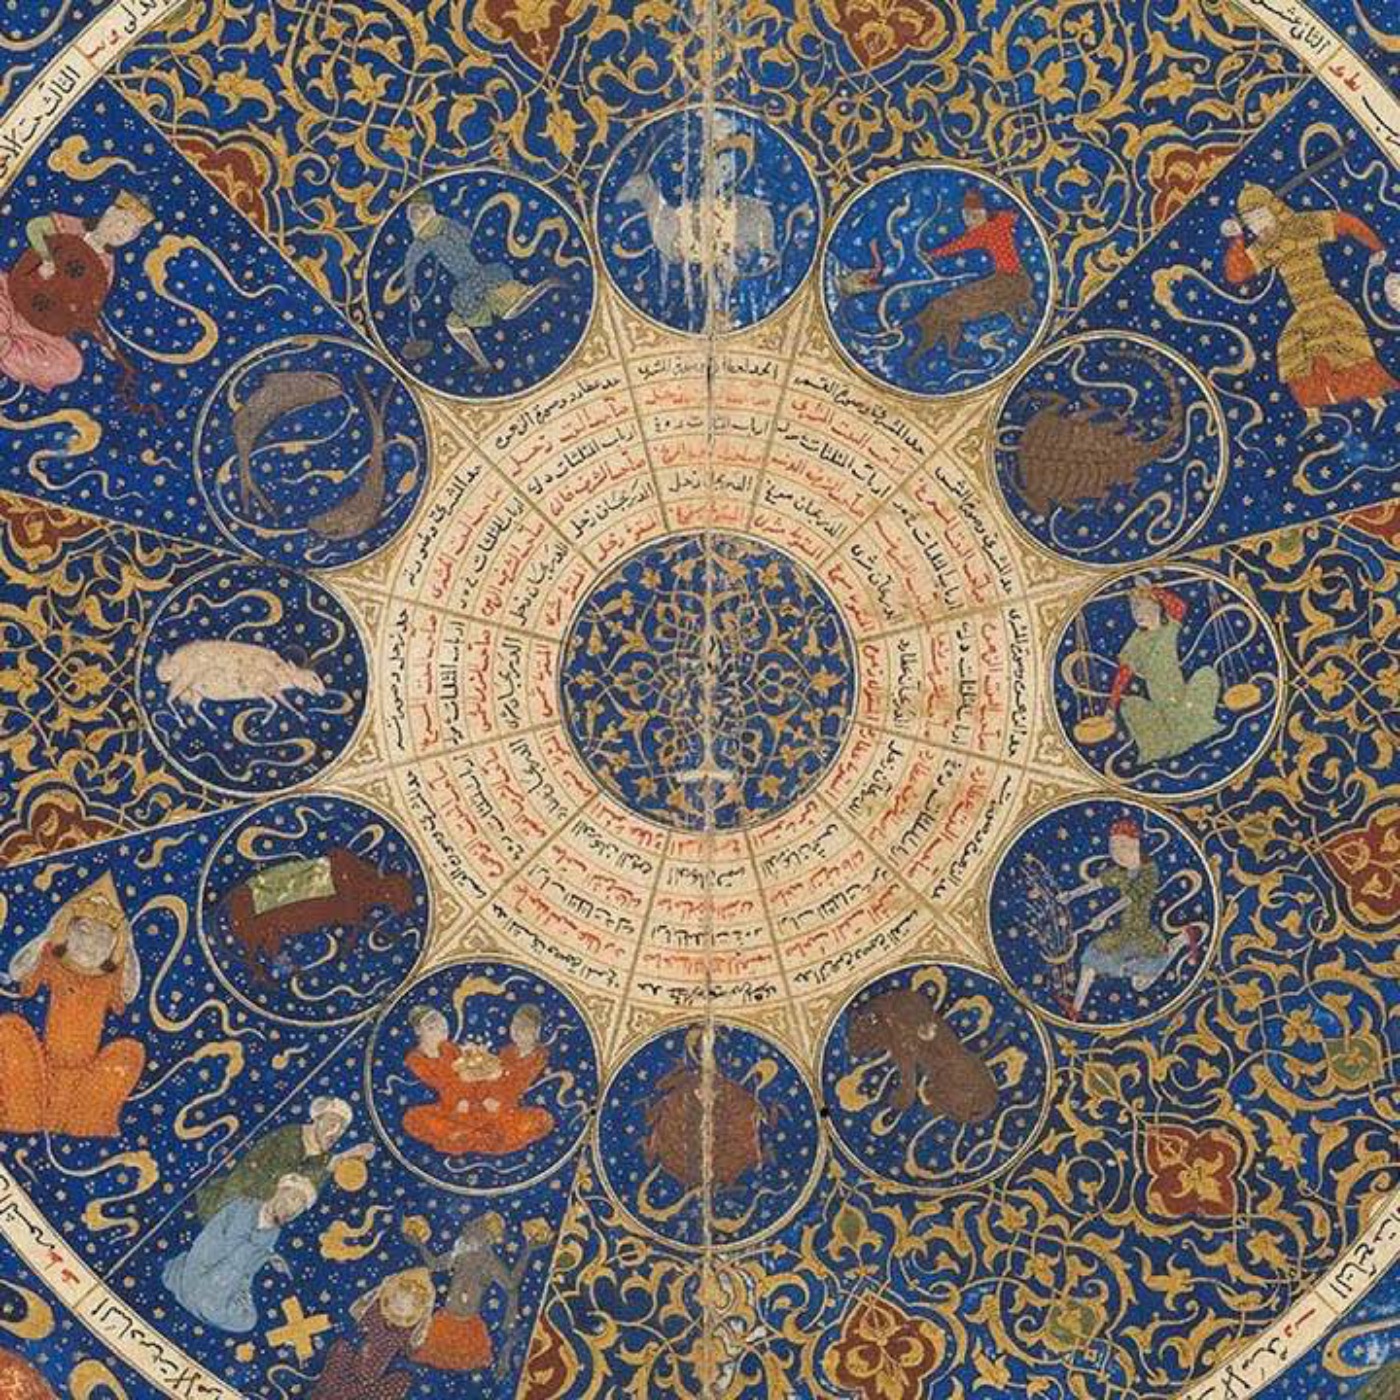 Astrology in the early Islamicate World